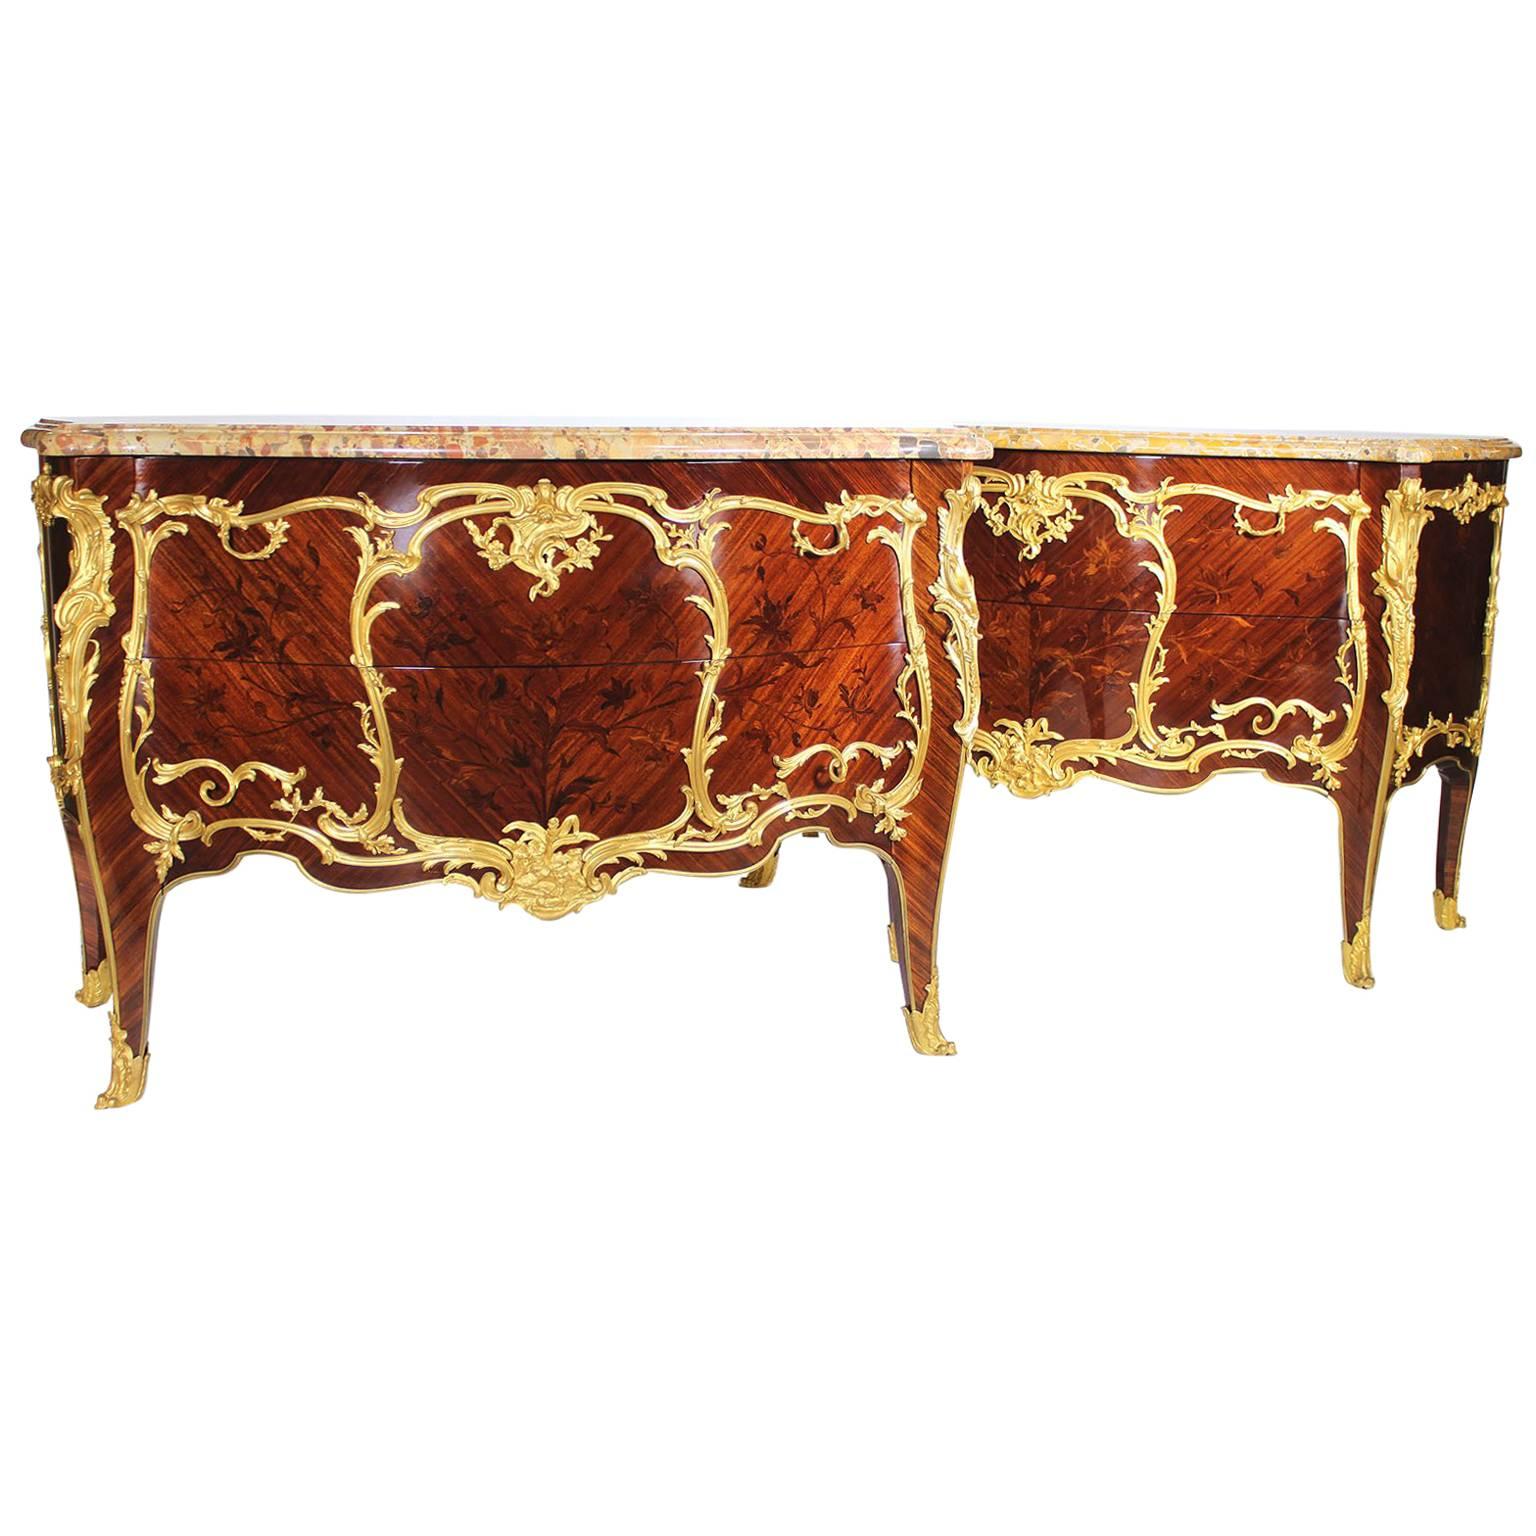 Fine Pair of 19th Century Louis XV Style Gilt Bronze-Mounted Commodes For Sale